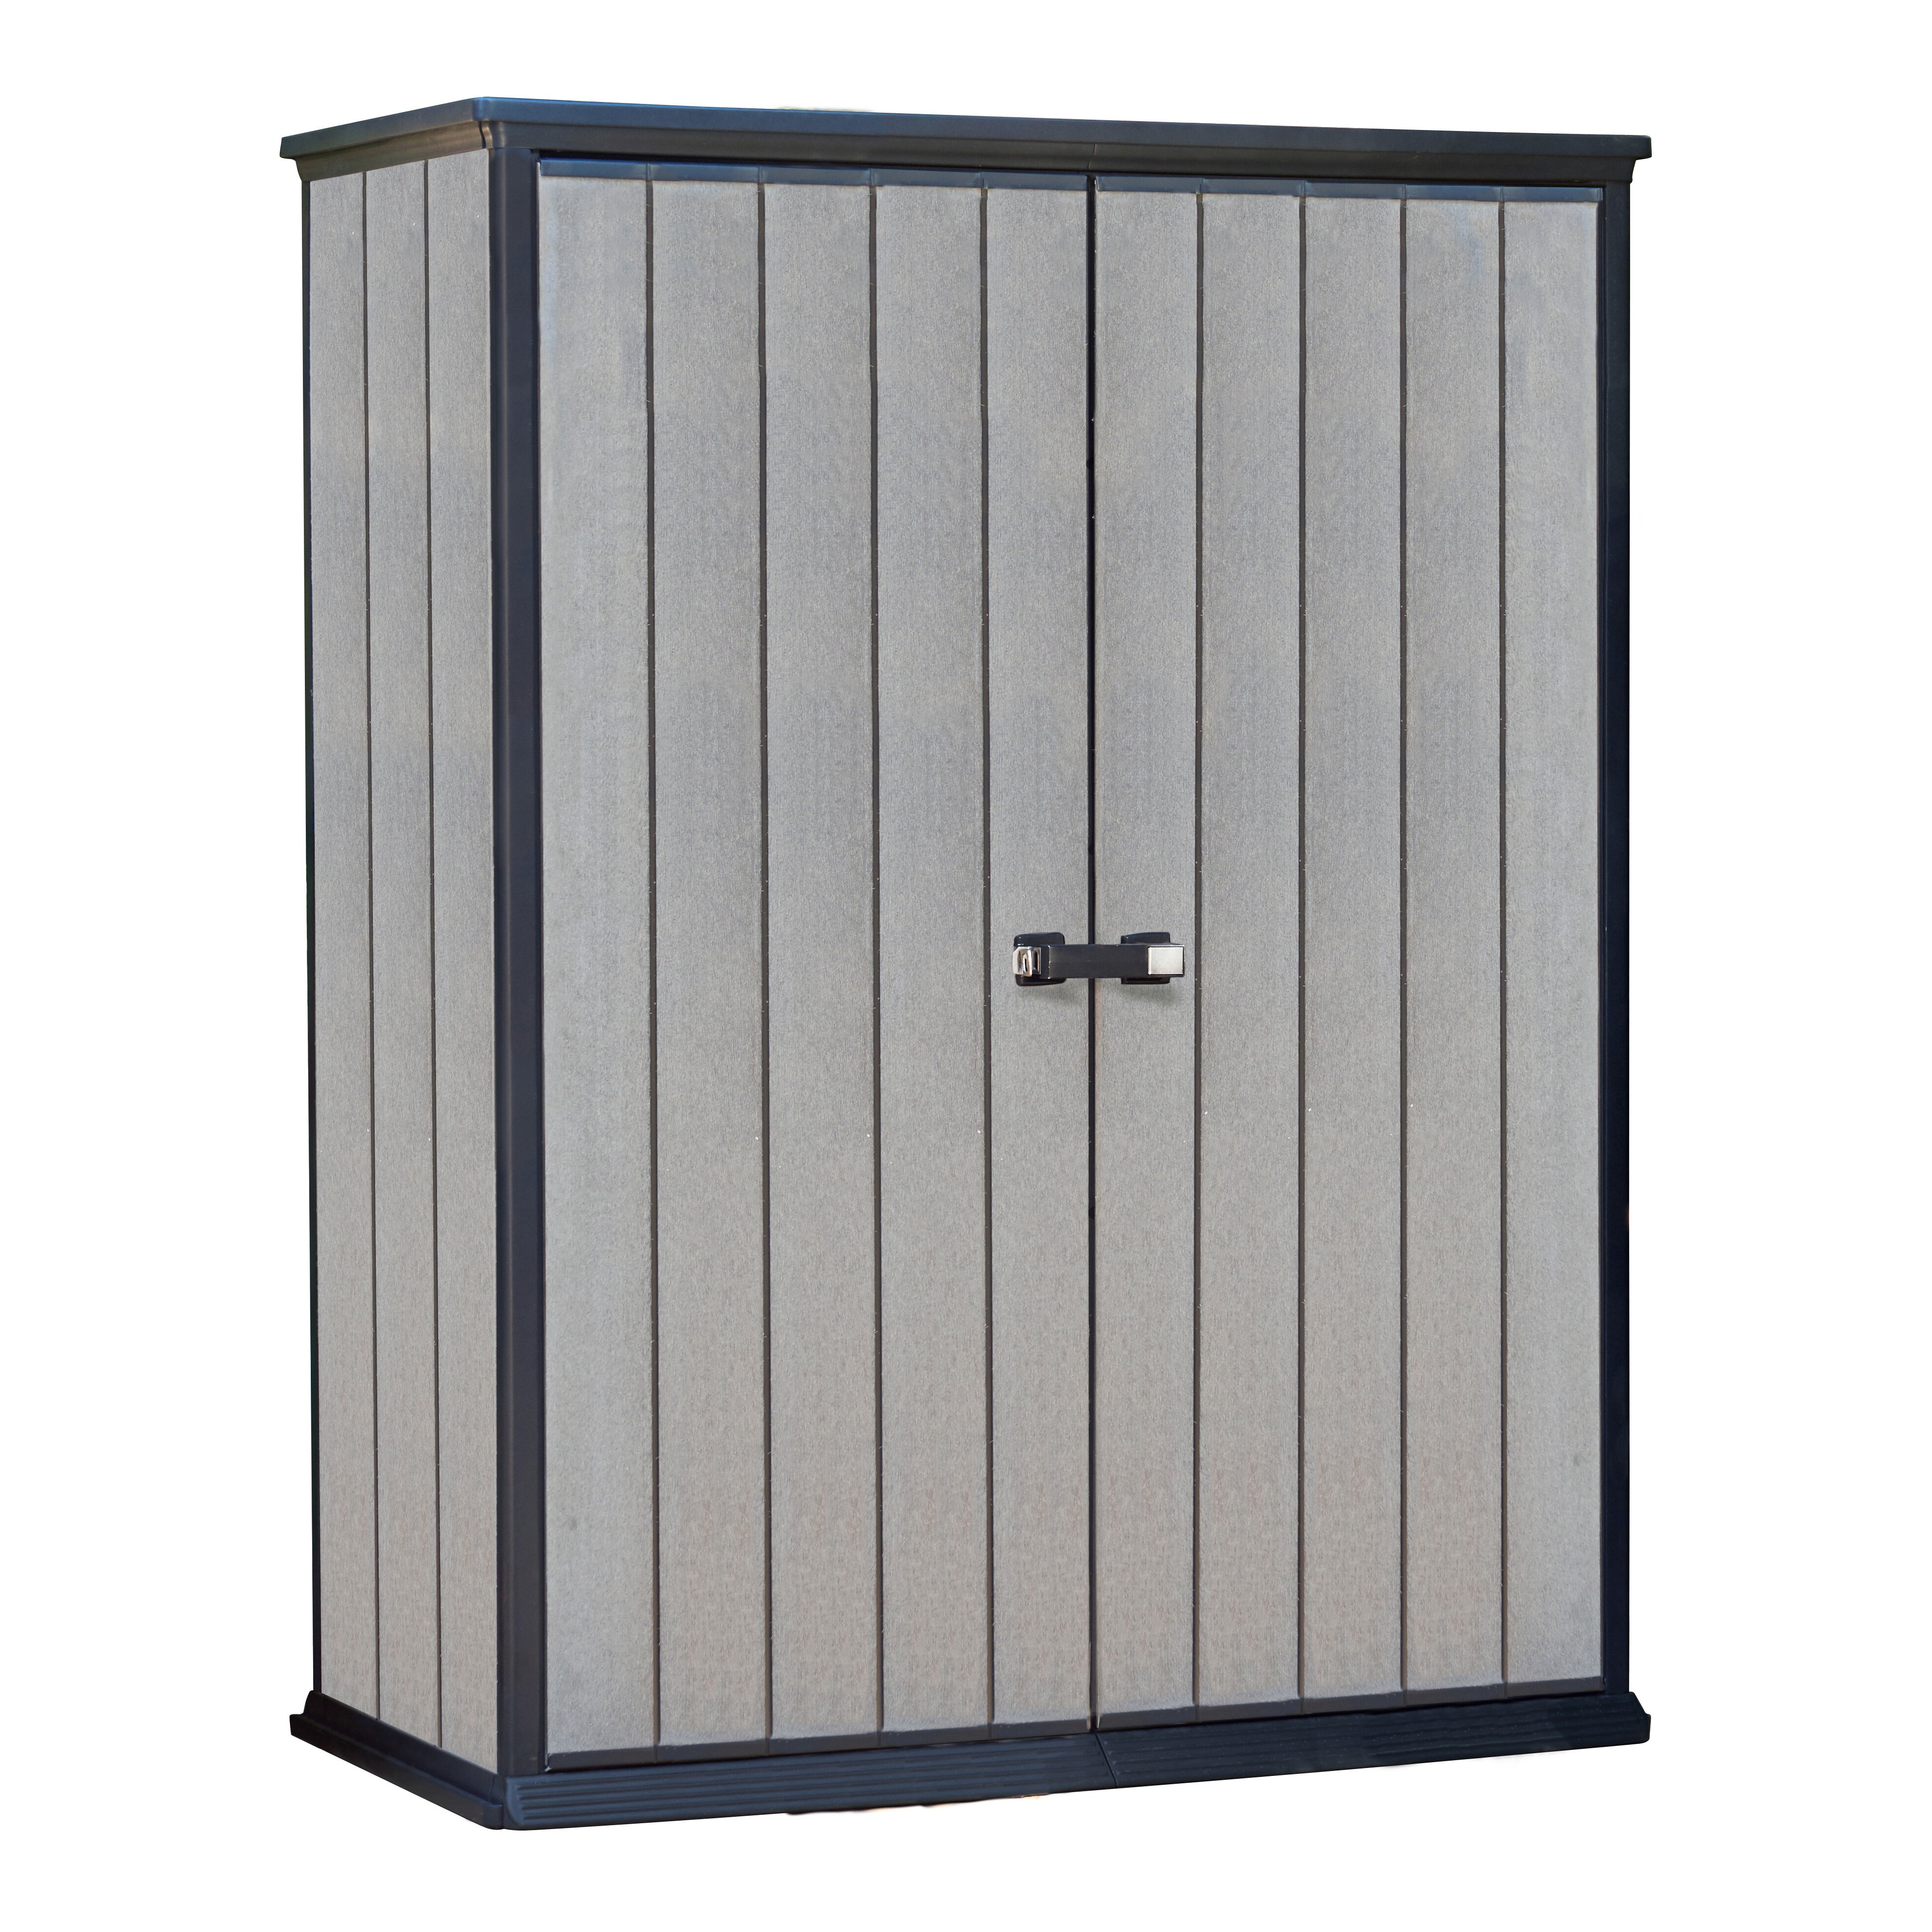 keter high store 4 ft. x 2 ft. resin storage shed